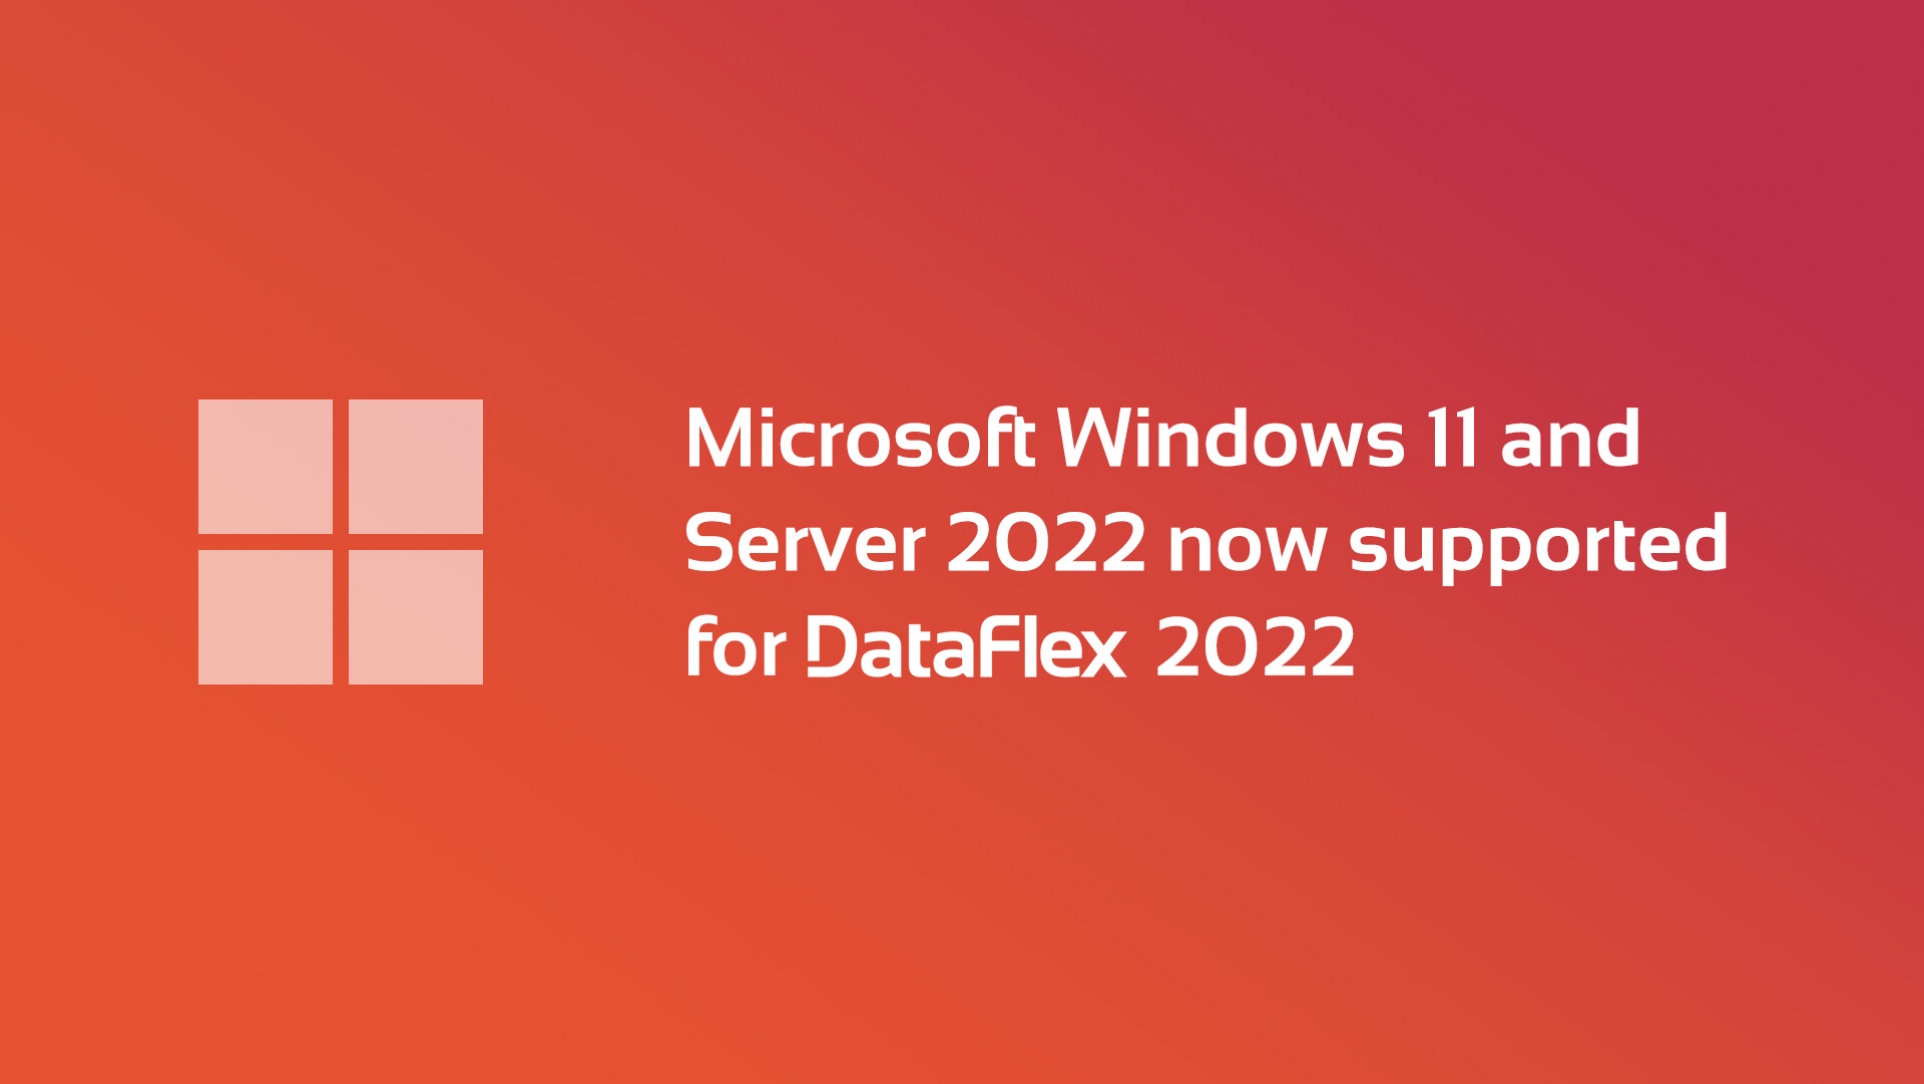 Microsoft’s Windows 11 and Windows Server 2022 now supported platforms for DataFlex 2022/20.1!